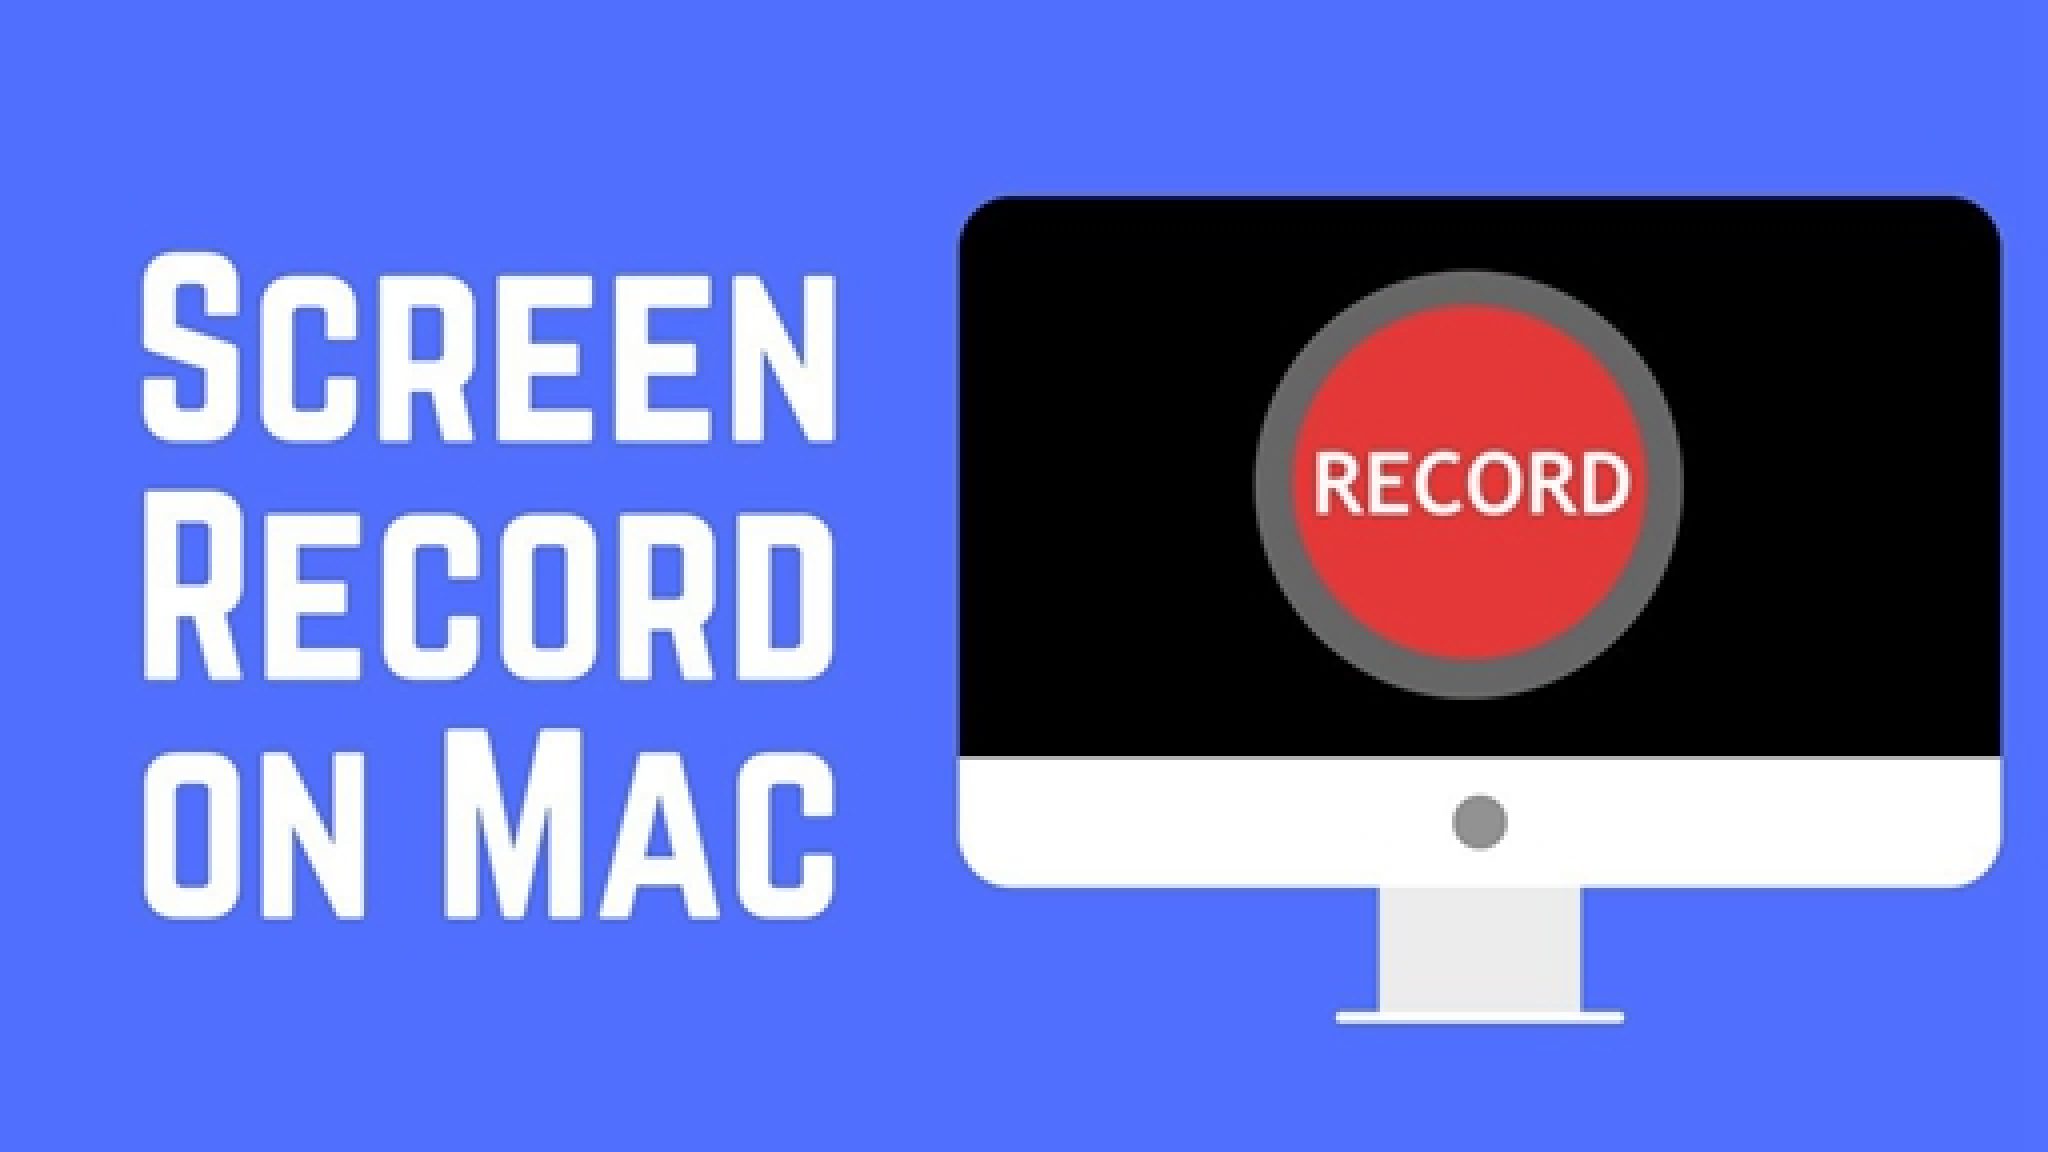 best screen recorder for mac free download